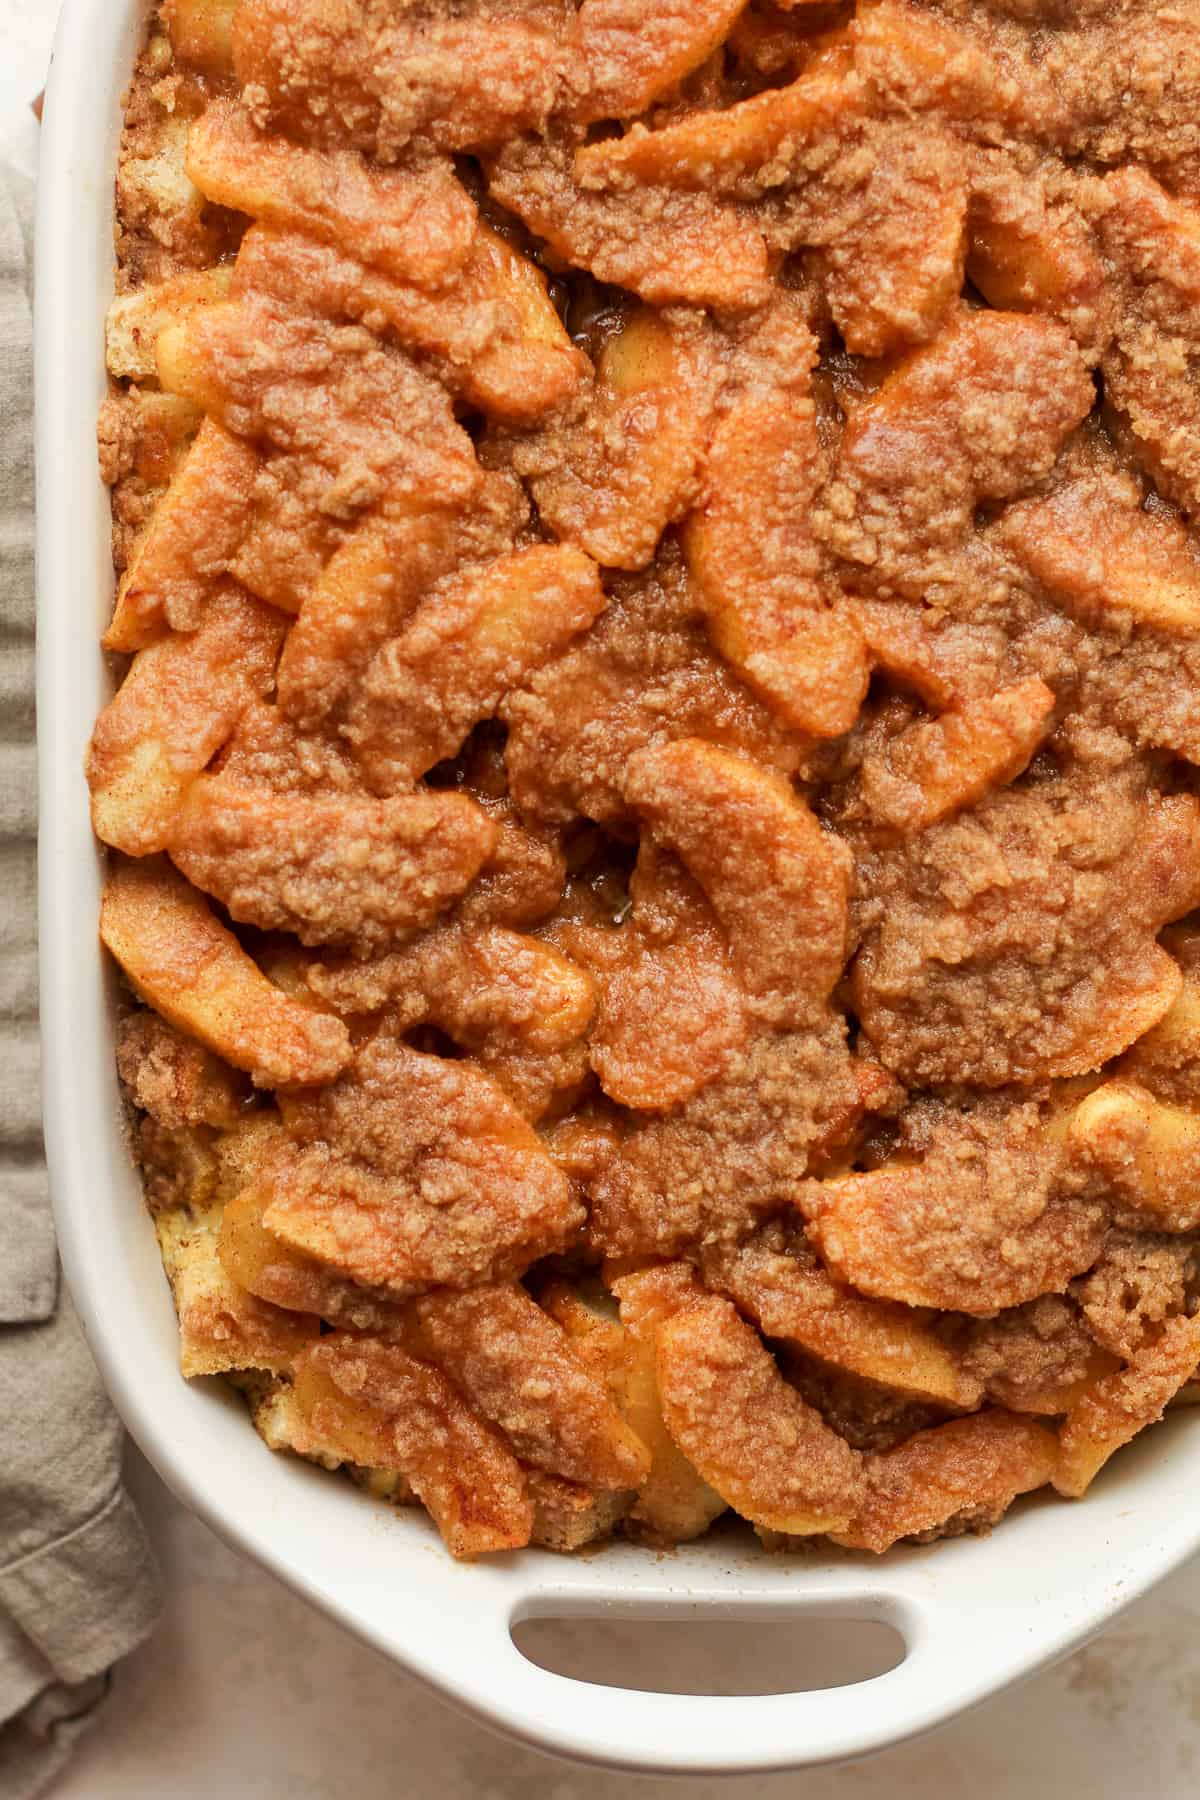 Closeup view of a French Toast Casserole with apple slices and a crumble topping.